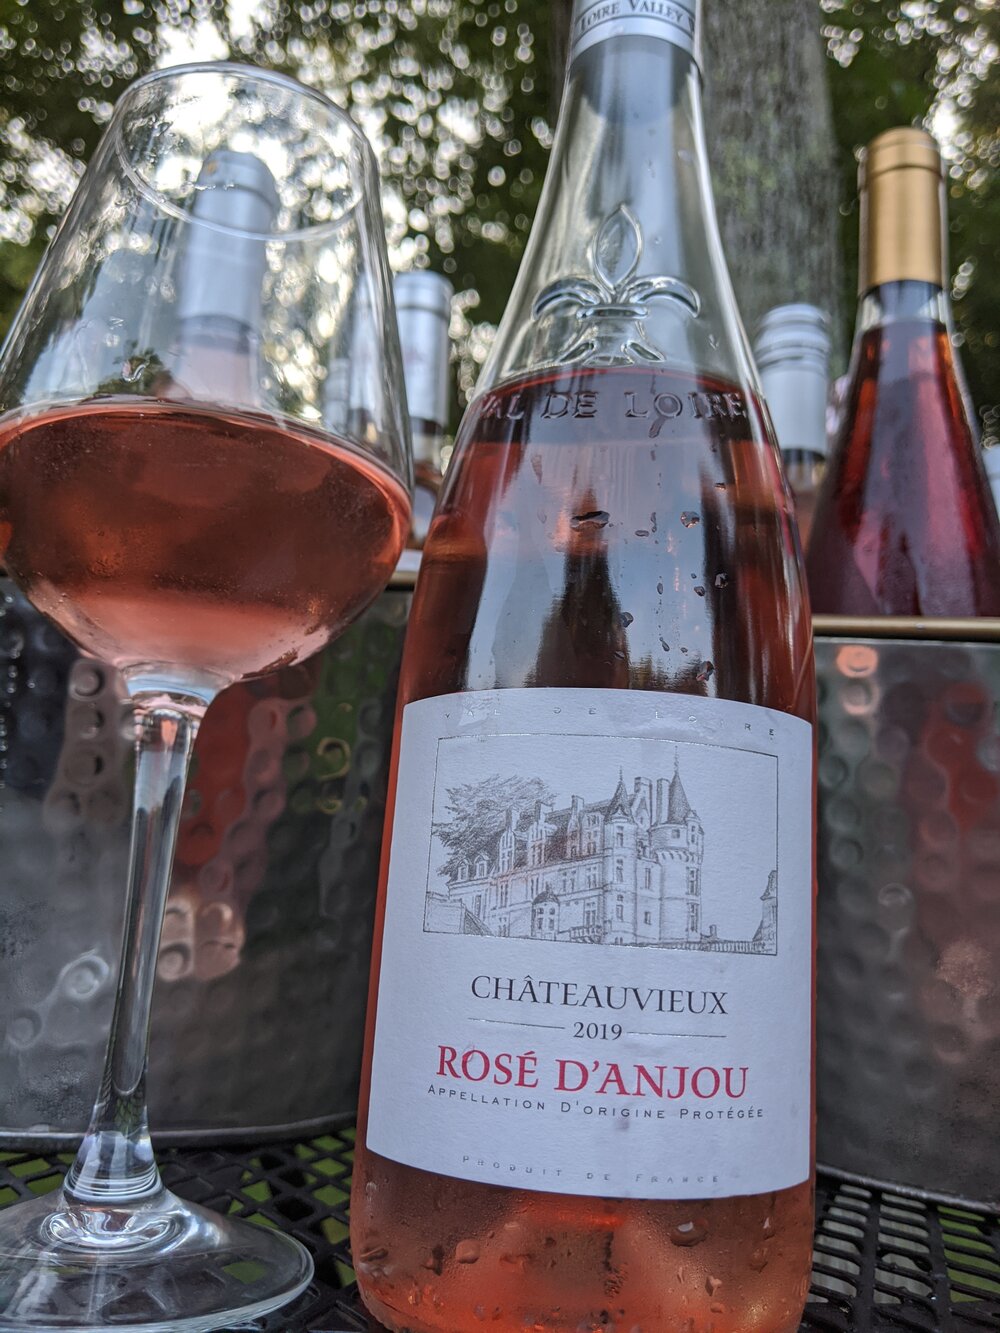 Day #10 Chaeauvieux  Rose D'Anjou. A